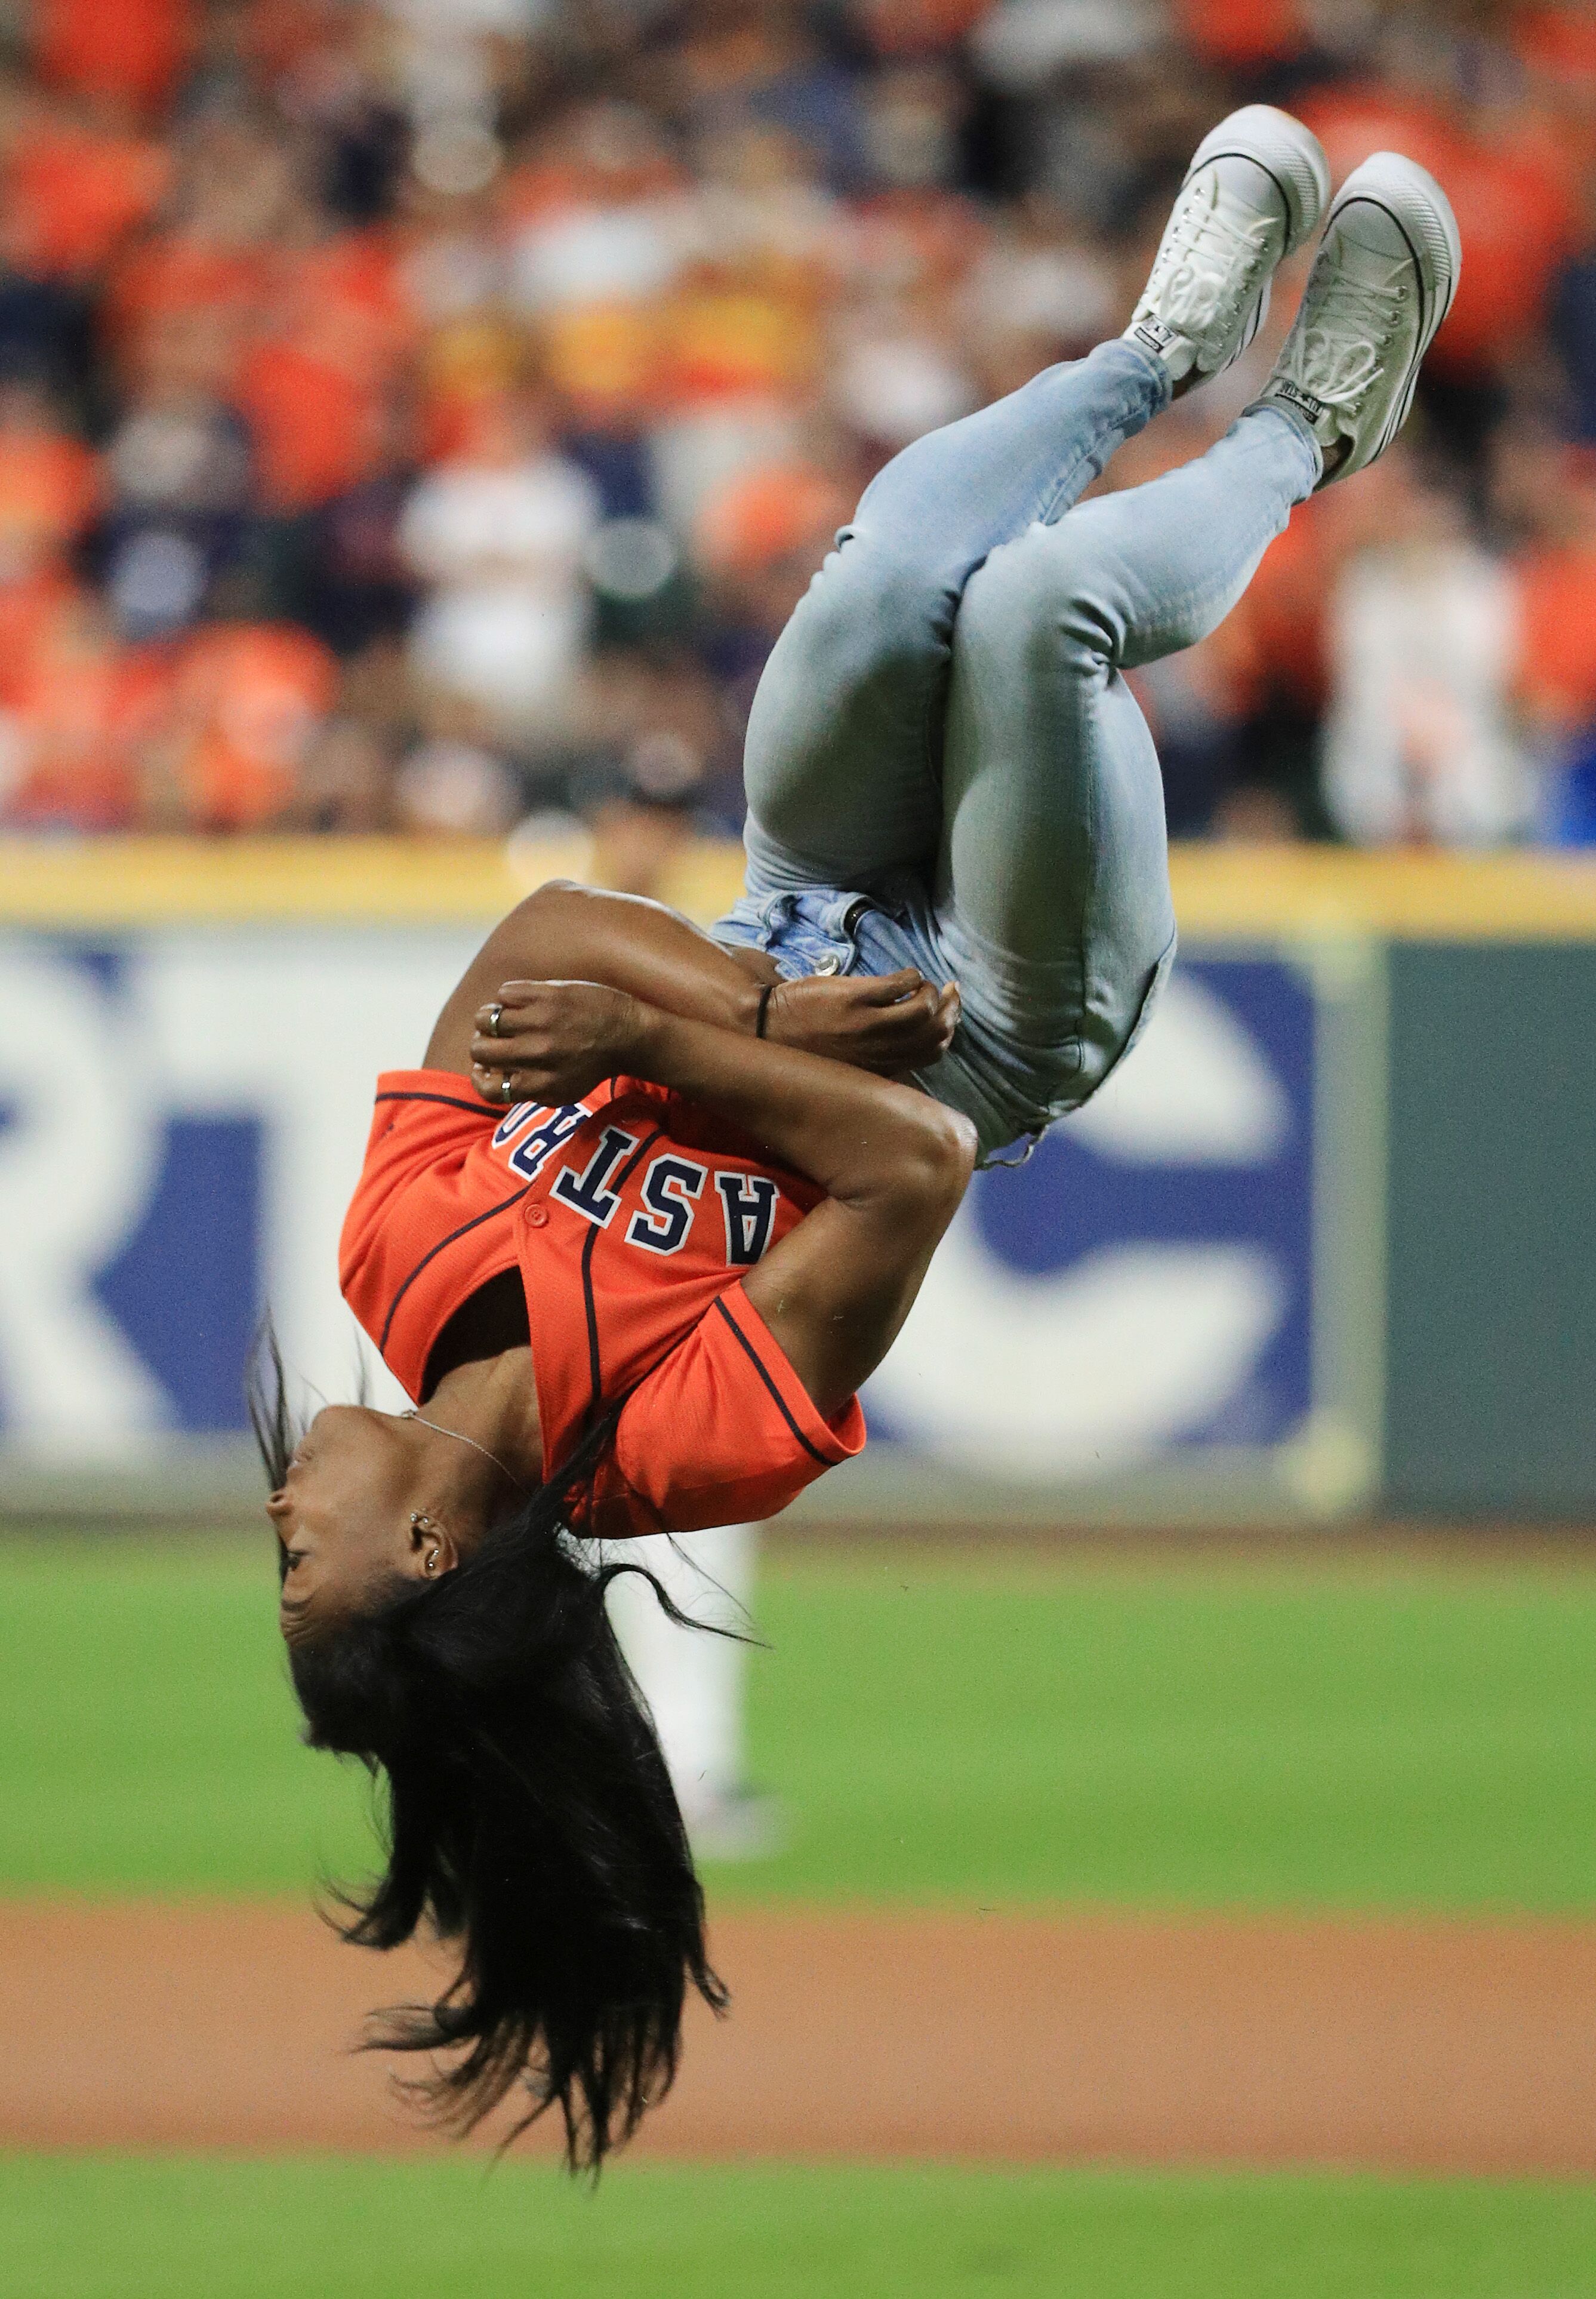 Simone Biles at a World Series game between the Houston Astros and the Washington Nationals on October 23, 2019 in Texas | Source: Getty Images